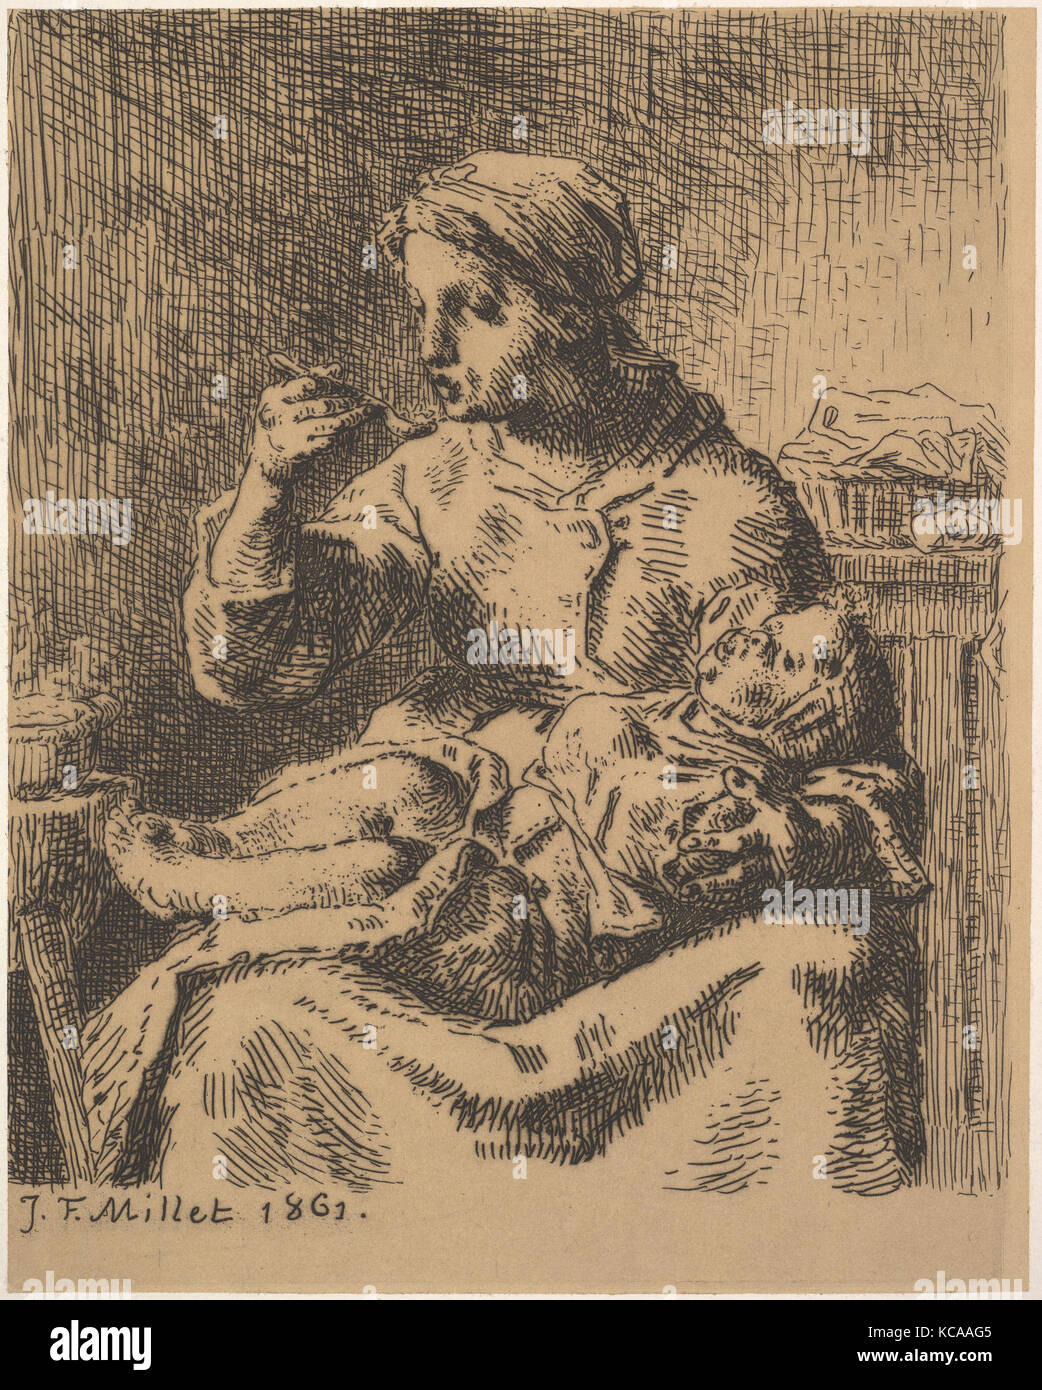 Cooling the Porridge, 1861, Etching on chine collé; fifth (final) state, image: 6 1/2 x 5 3/16 in. (16.5 x 13.2 cm), Prints Stock Photo